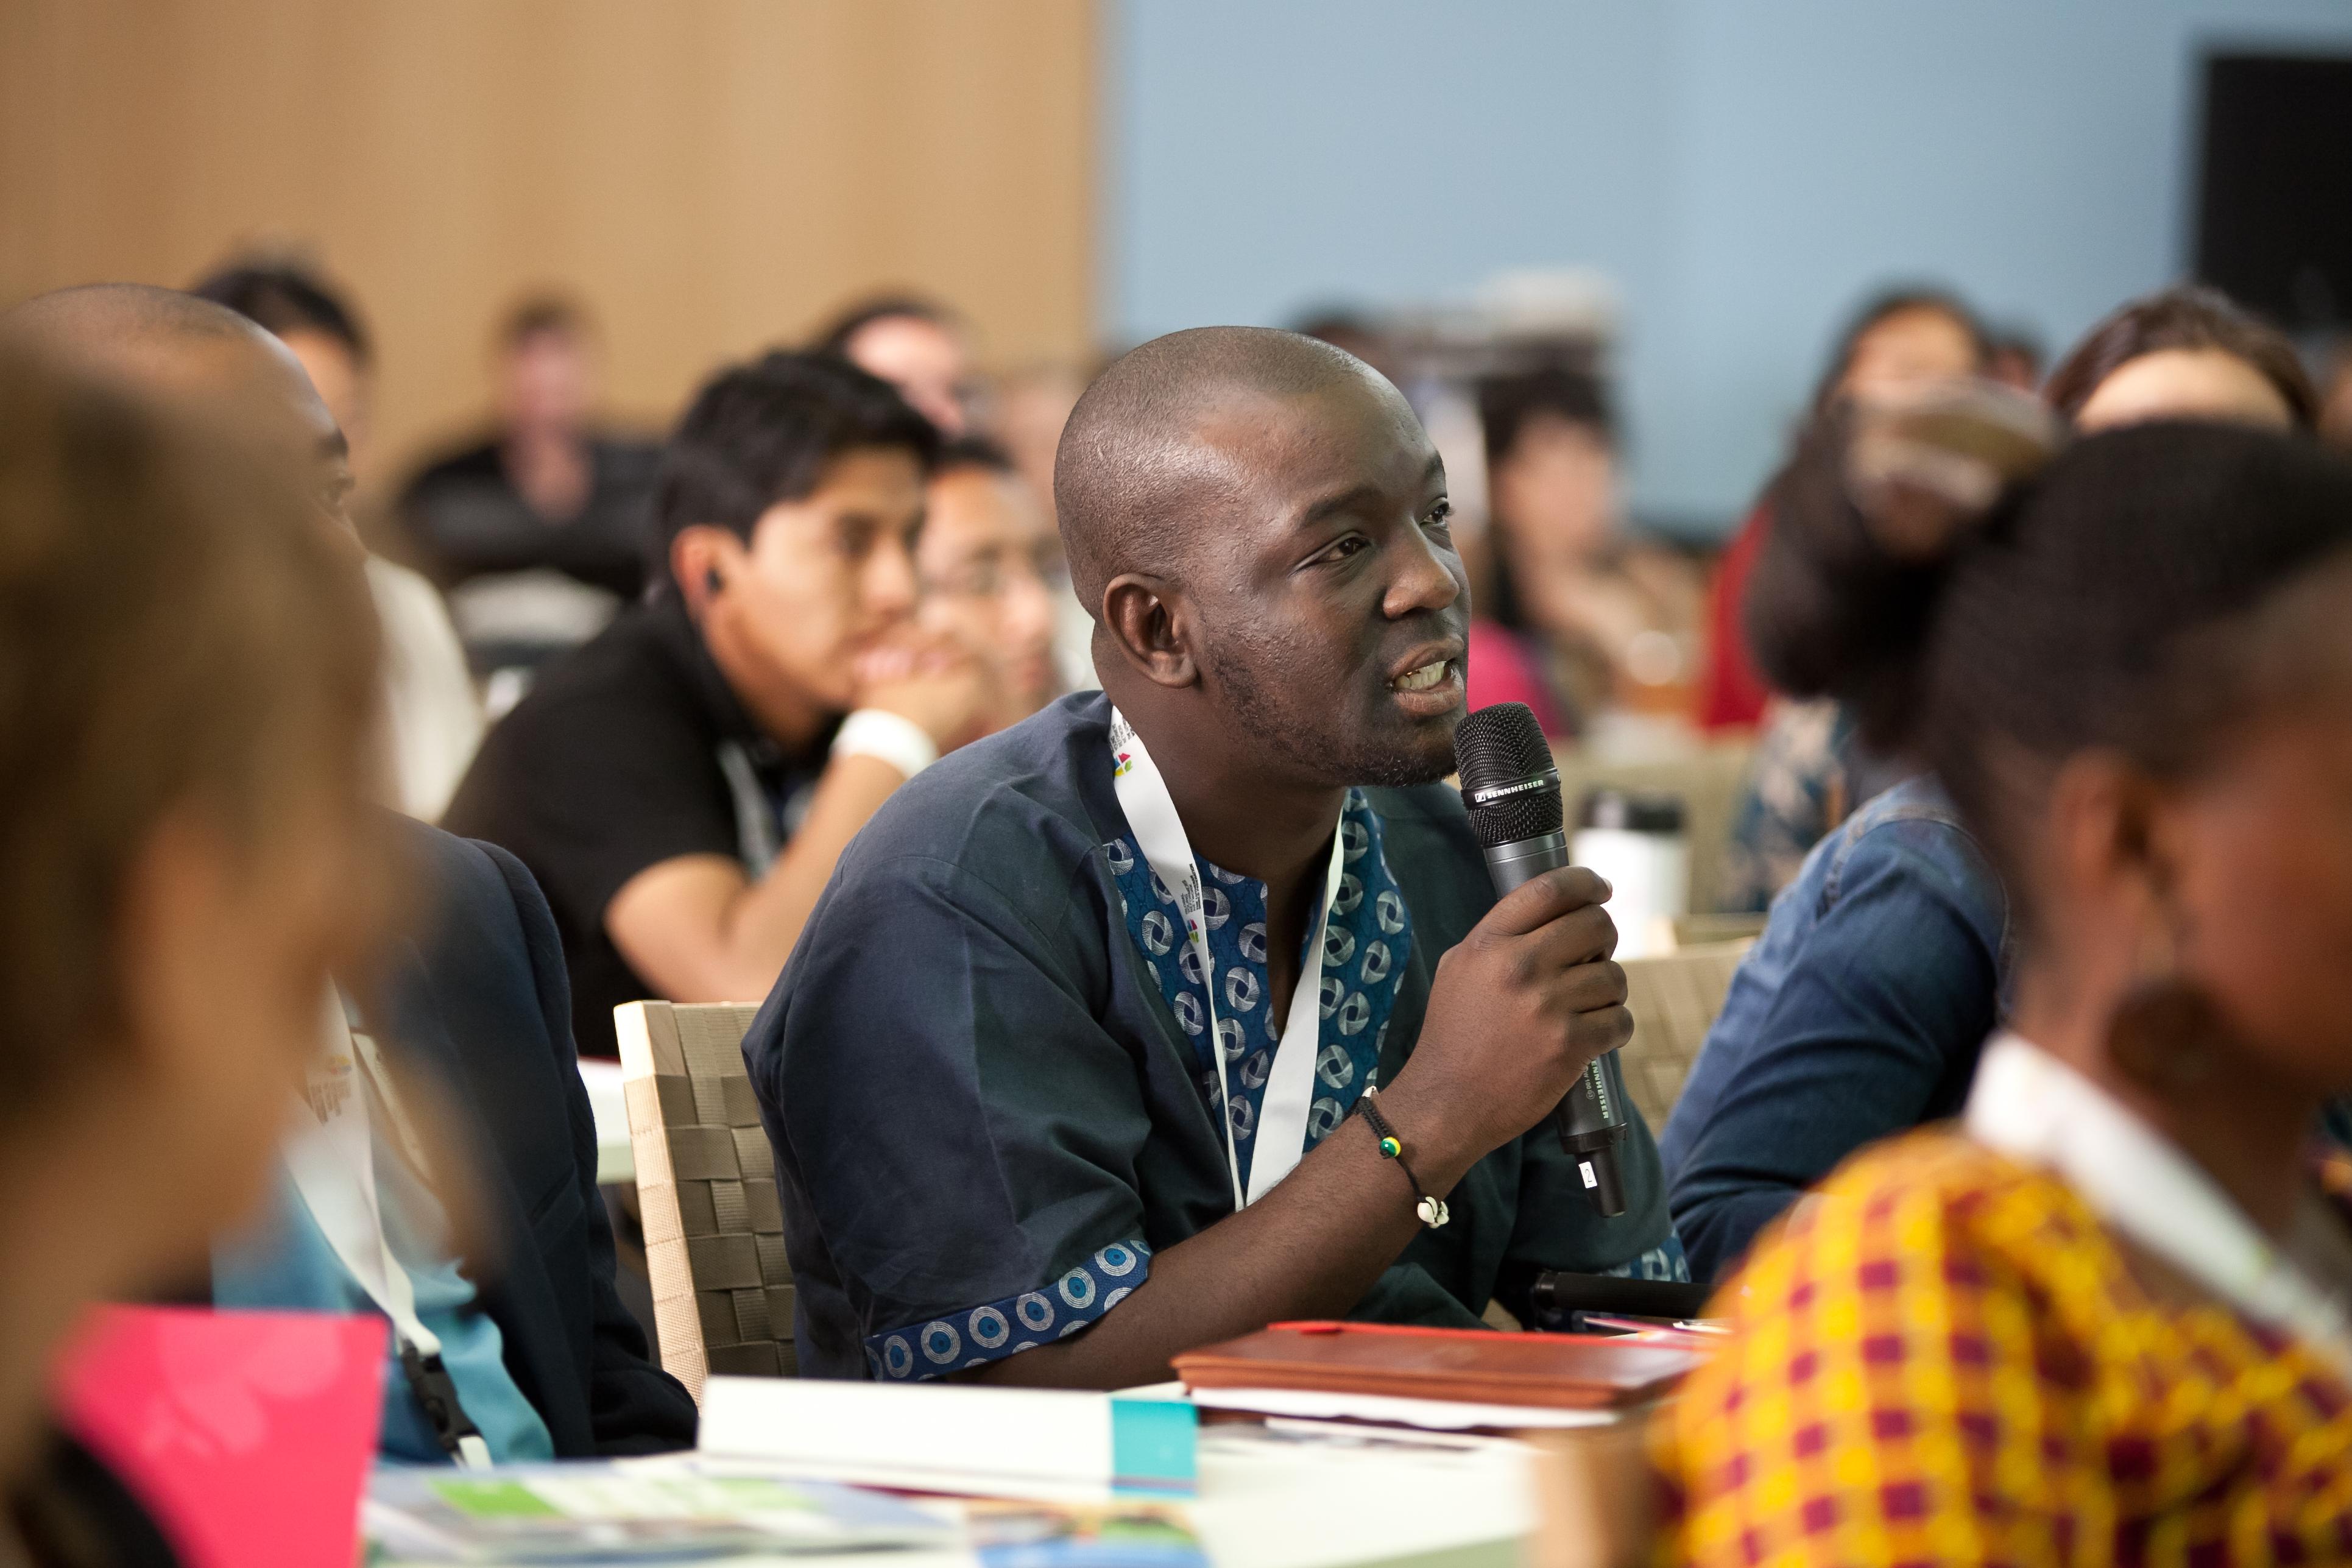 A delegate at a LWF youth meeting makes a submission. Photo: LWF/Marko Schoeneberg